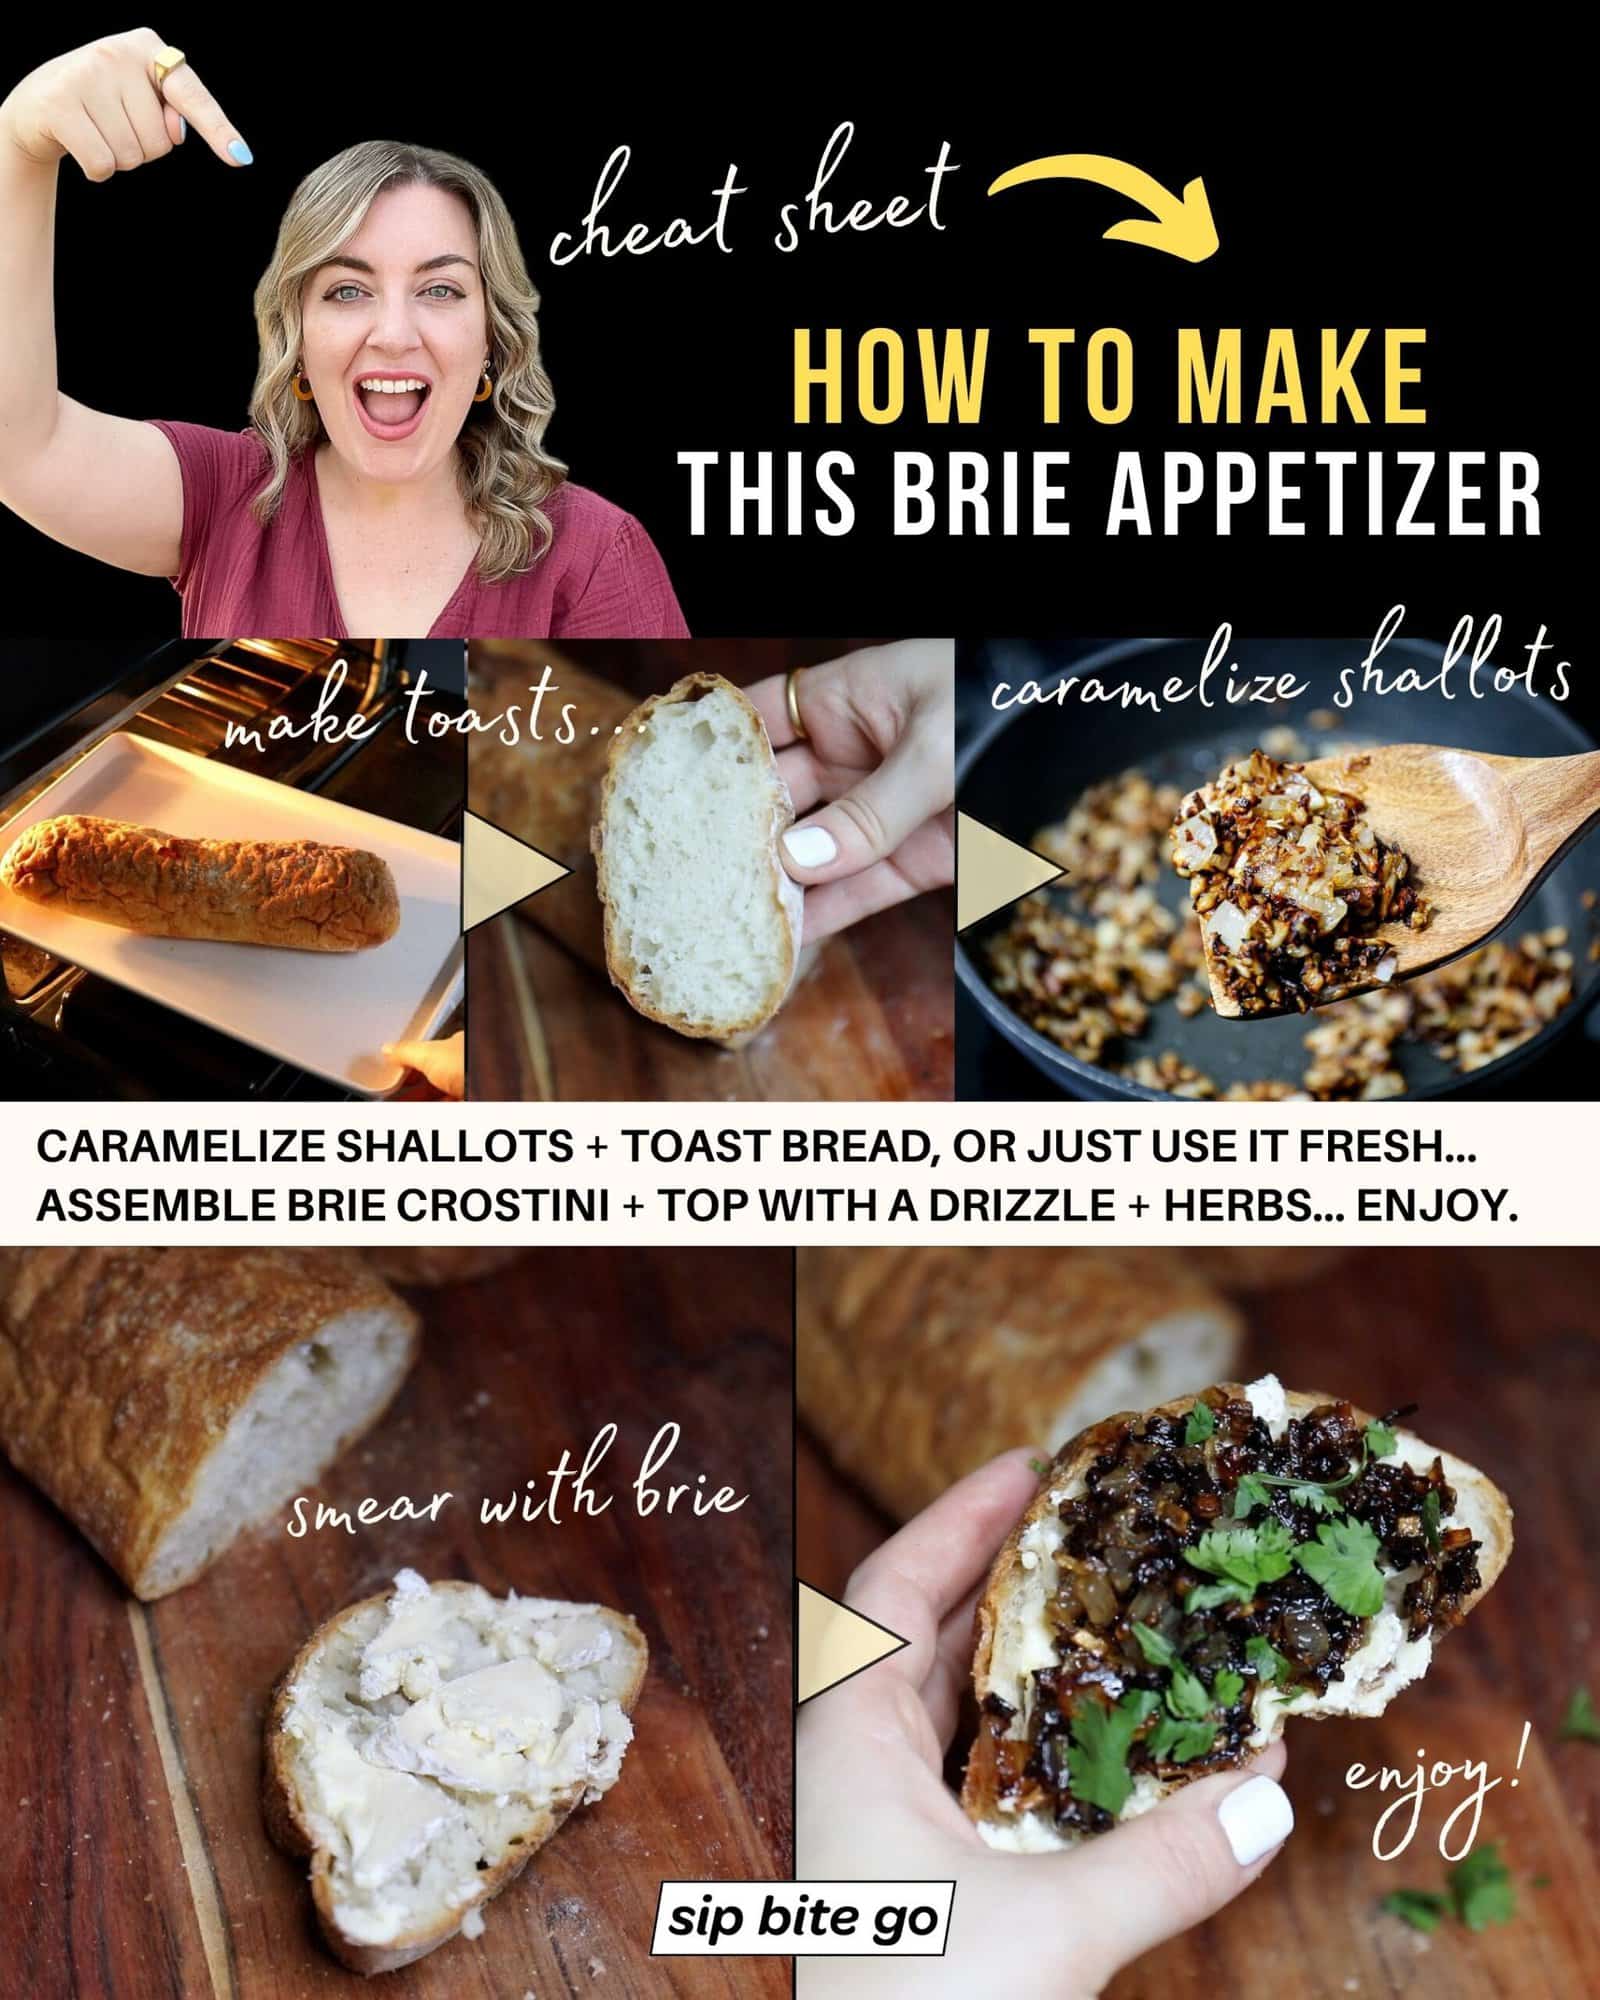 Infographic with detailed recipe steps and captions for making caramelized shallots and baked brie crostinis 